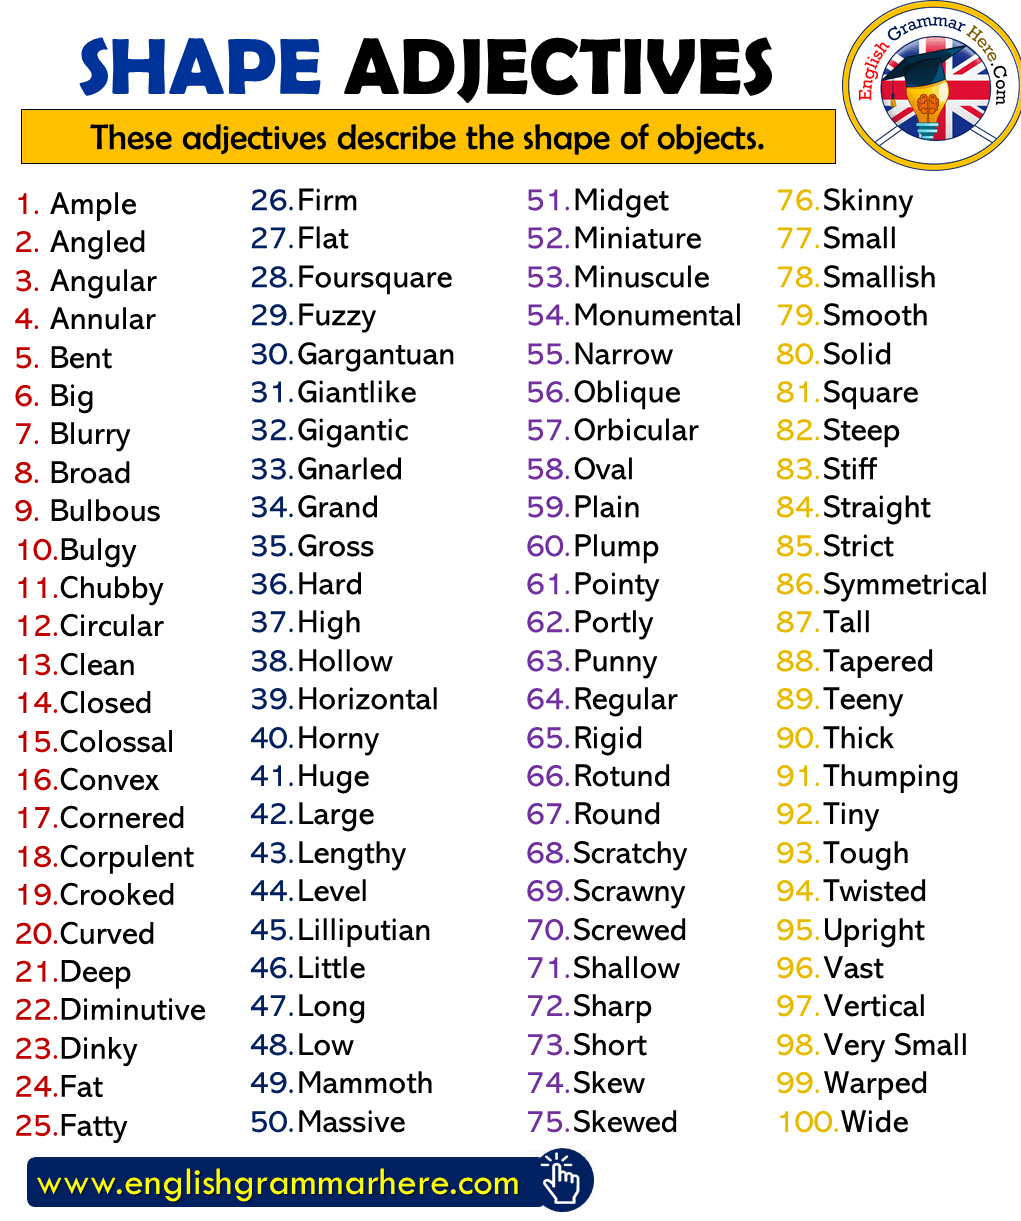 Shape Adjectives List in English